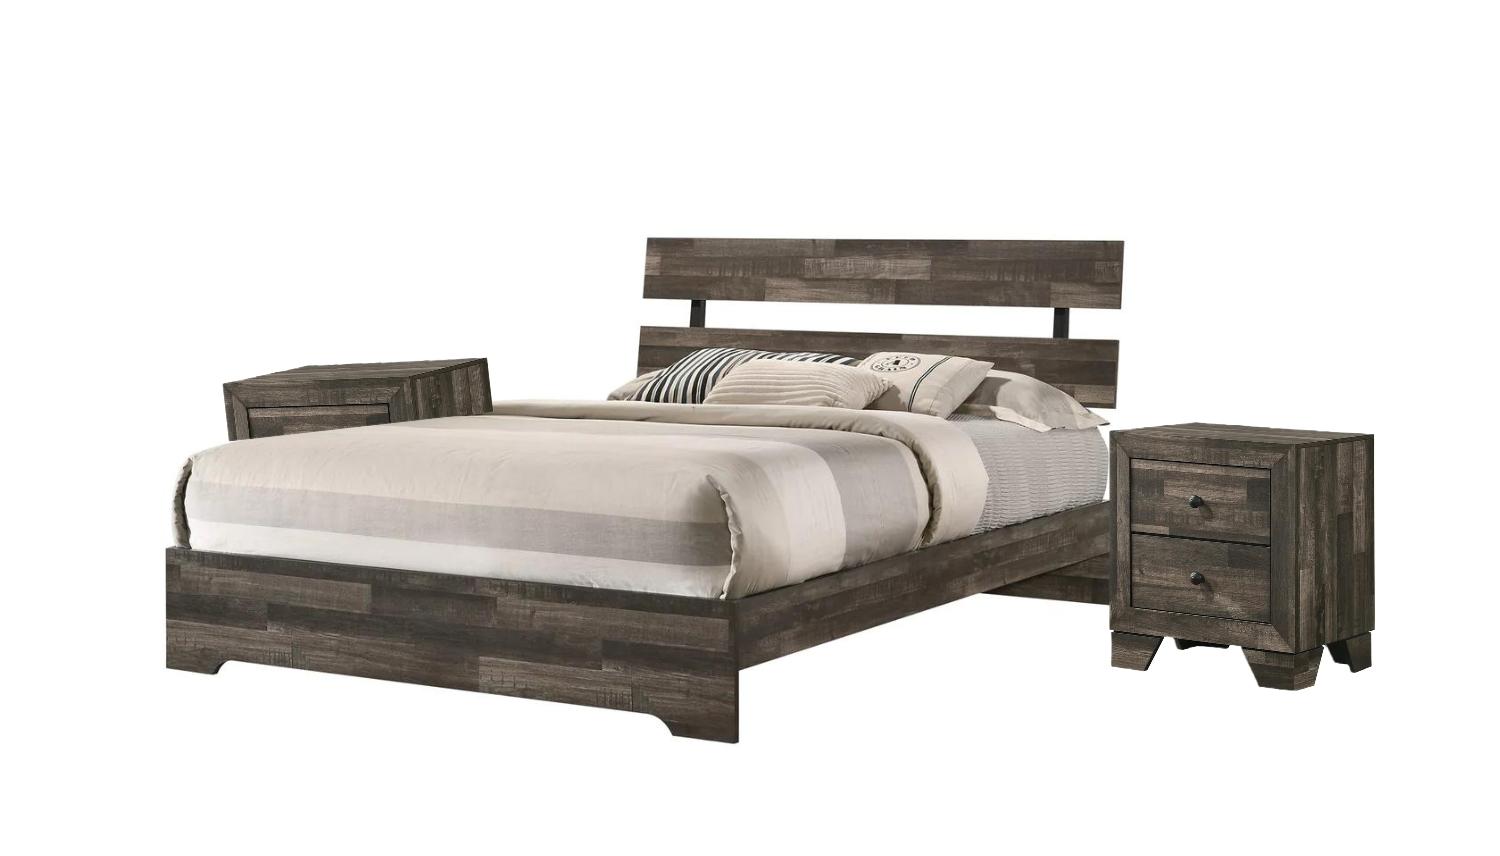 Traditional, Rustic Panel Bedroom Set Atticus B6980-T-Bed-3pcs in Brown 